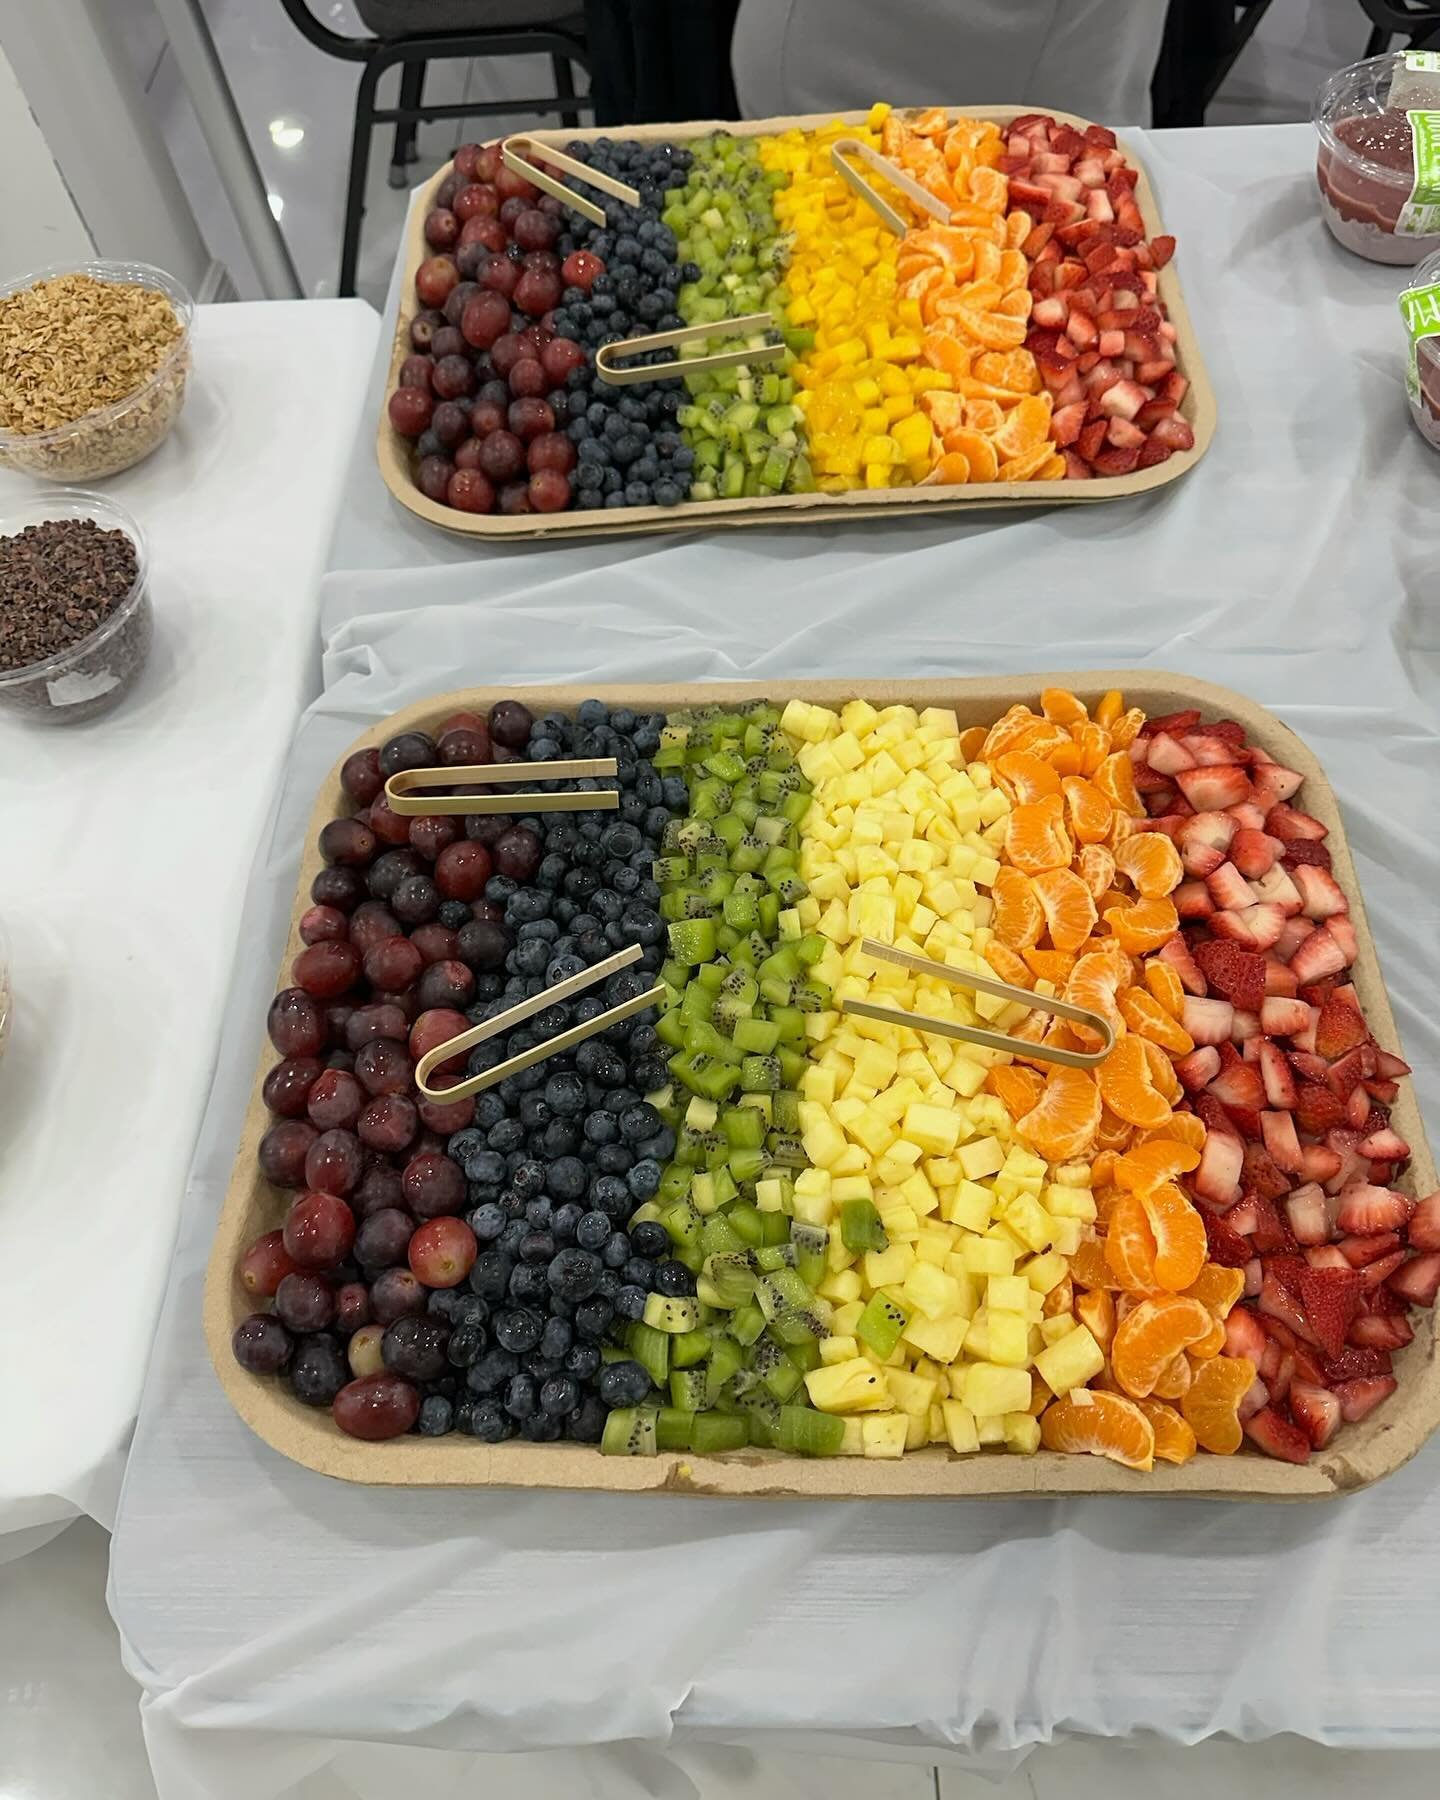 Yes, we cater! 
If you&rsquo;ve never been to a party where you can make your own a&ccedil;a&iacute; bowl, you might want to consider any excuse to throw a party just to do it! 

A&ccedil;a&iacute; bowls are the perfect yummy, healthy way to enjoy wh